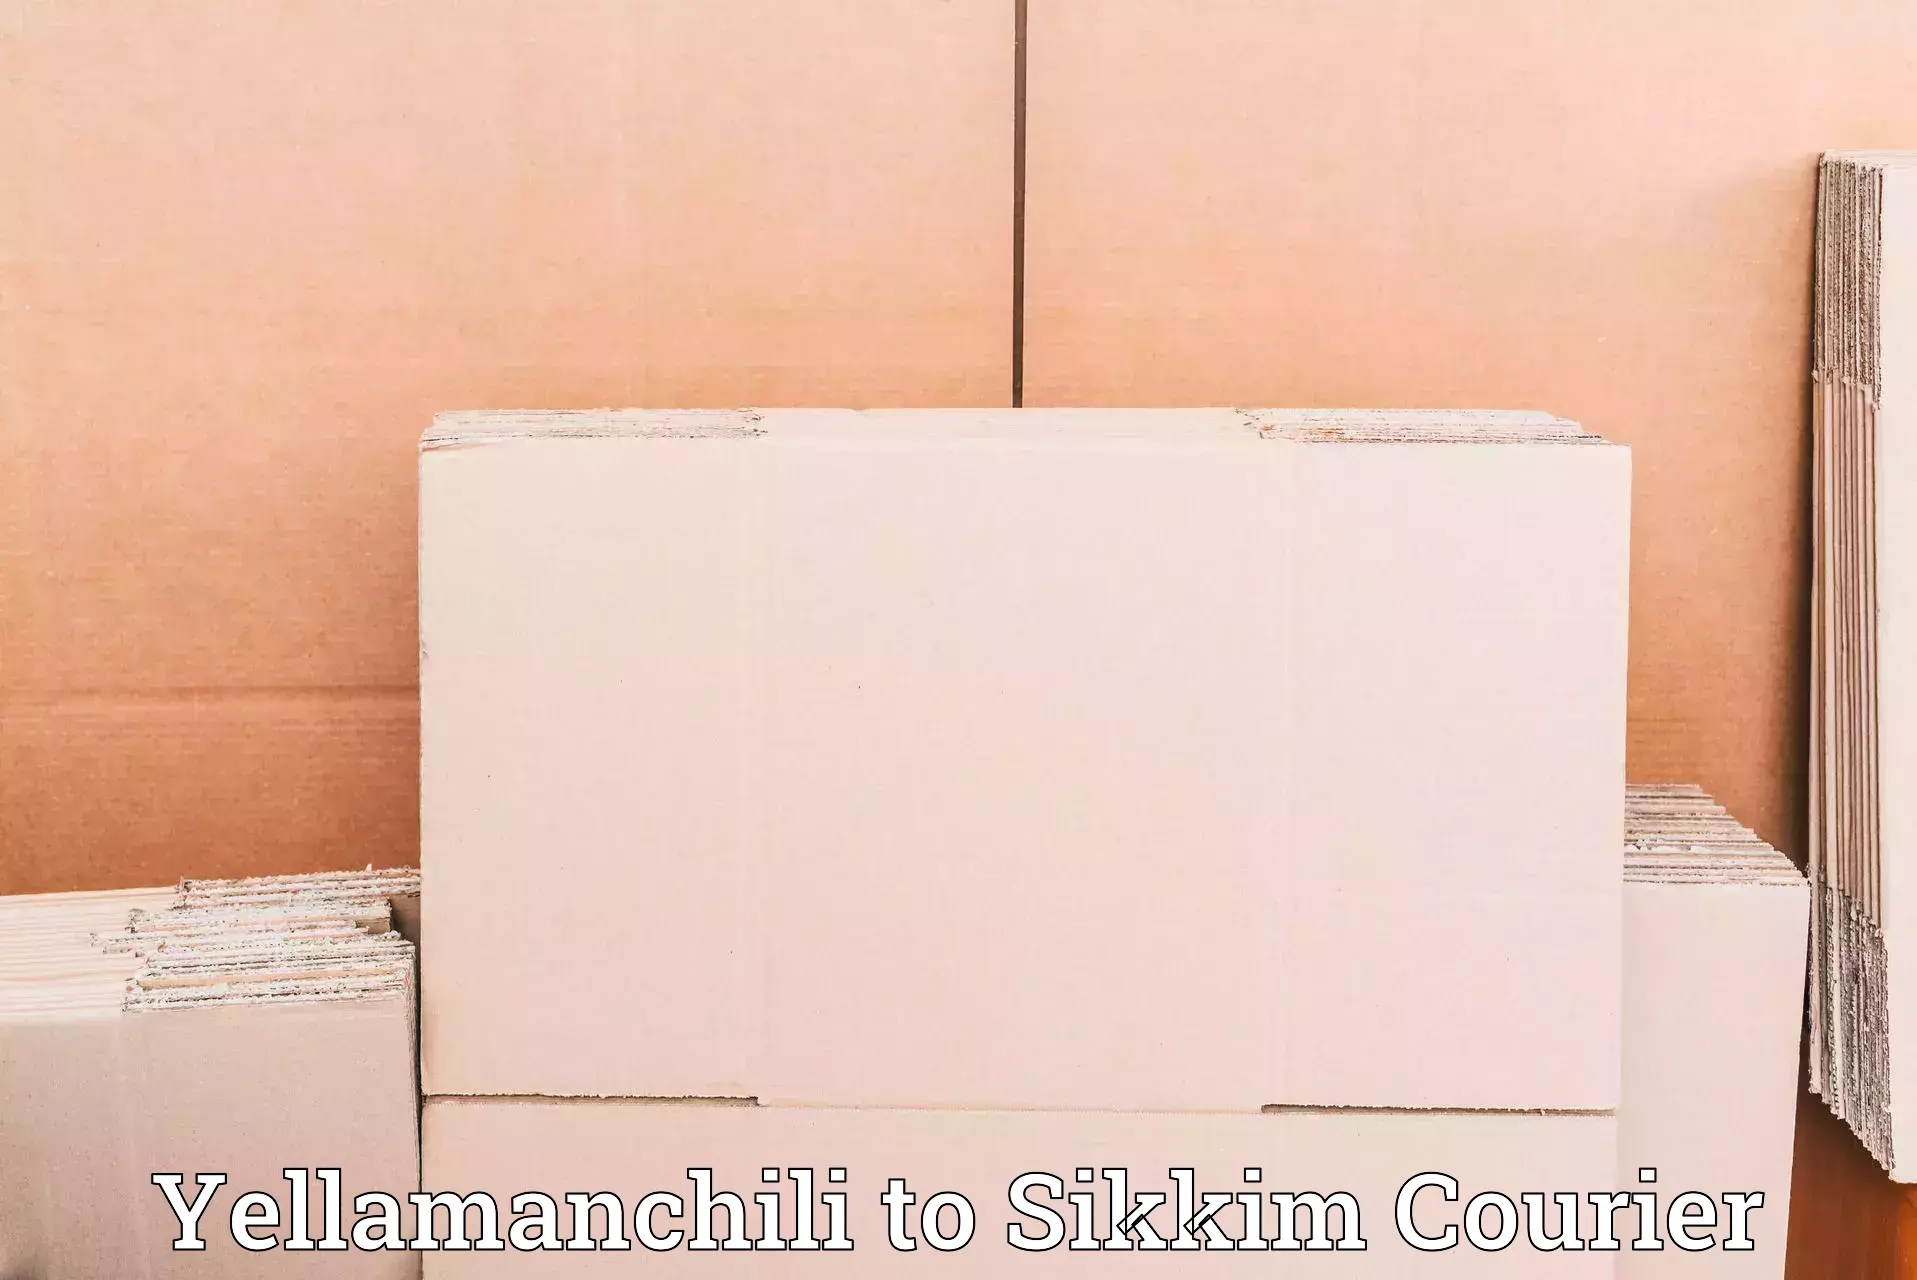 Flexible delivery scheduling in Yellamanchili to Mangan